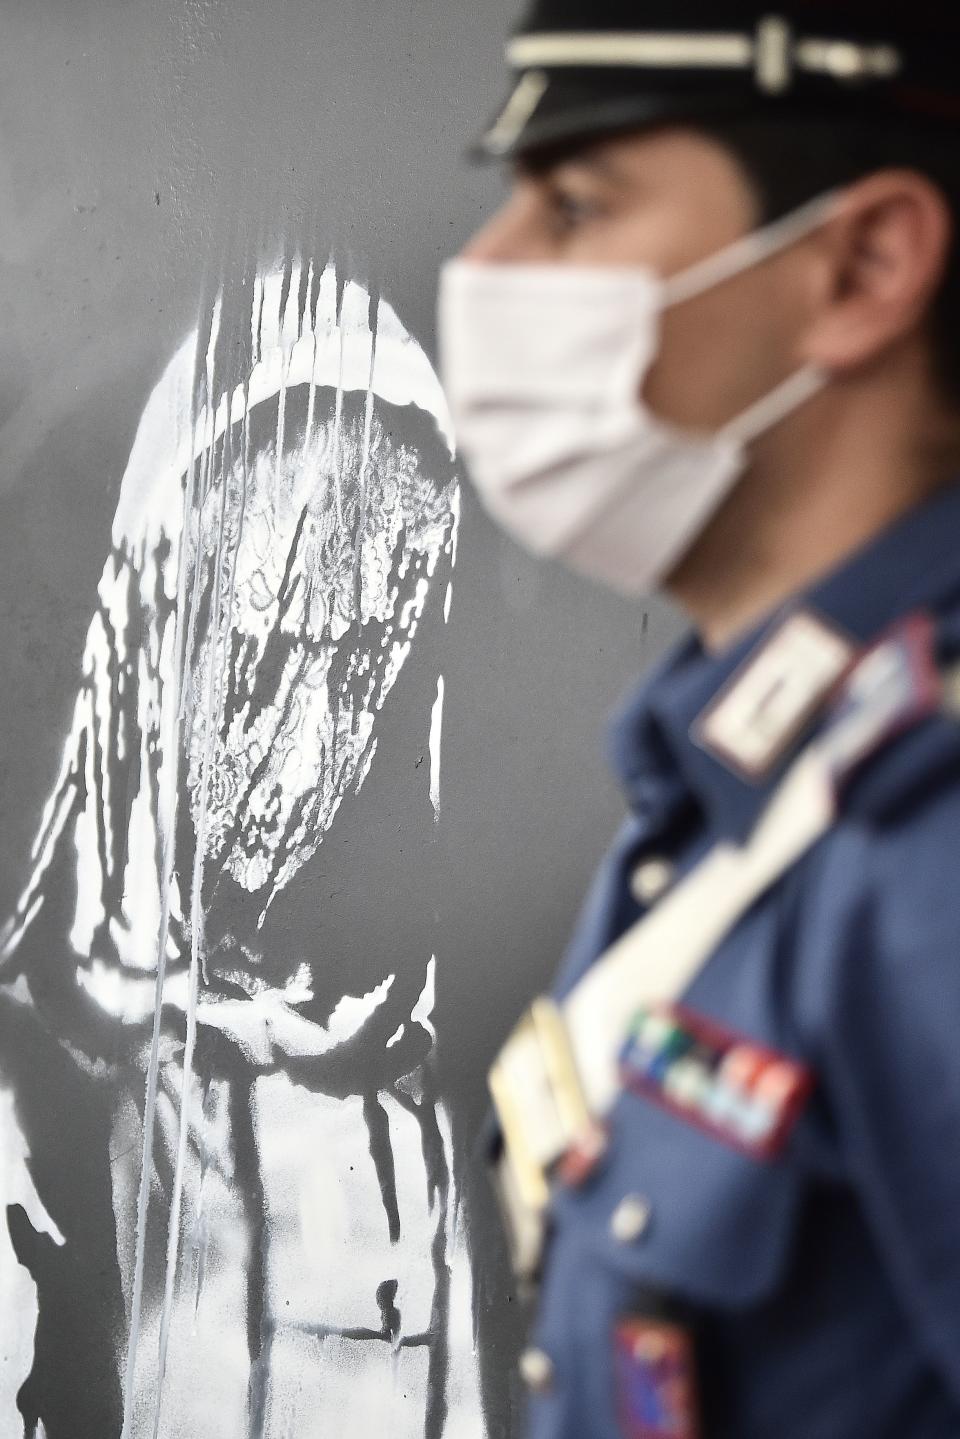 An Italian Carabiniere poses near a piece of art attributed to Banksy, that was stolen at the Bataclan in Paris in 2019, and found in Italy, during a press conference by Italian Carabinieri in L'Aquila on June 11, 2020. - The work was found in an abandoned farmhouse in Abruzzo, l'Aquila prosecutor informed on June 10, 2020. (Photo by Filippo MONTEFORTE / AFP) / RESTRICTED TO EDITORIAL USE - MANDATORY MENTION OF THE ARTIST UPON PUBLICATION - TO ILLUSTRATE THE EVENT AS SPECIFIED IN THE CAPTION (Photo by FILIPPO MONTEFORTE/AFP via Getty Images)